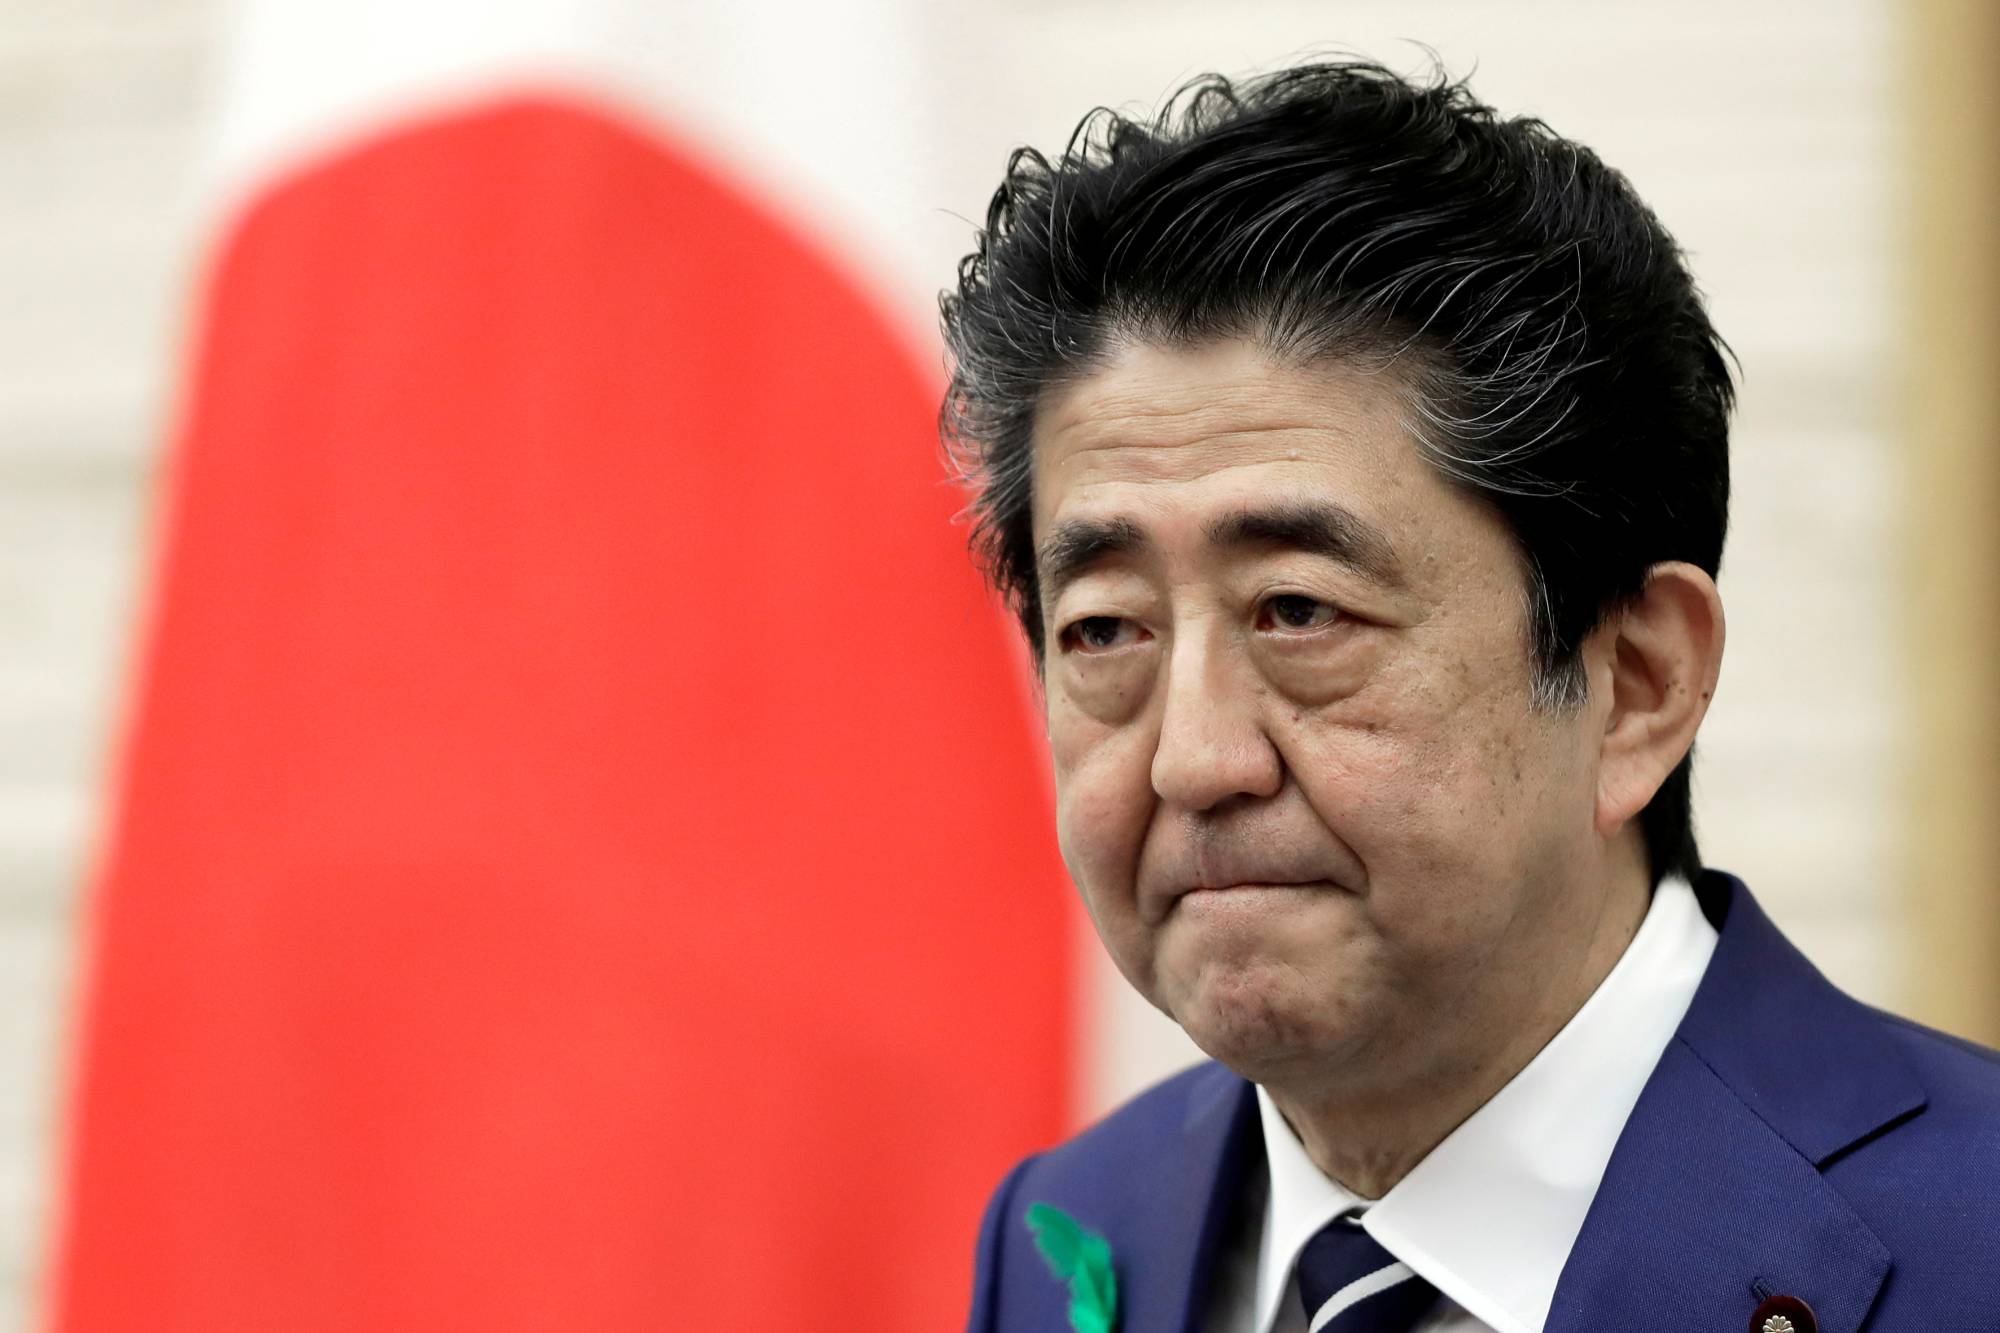 Prime Minister Shinzo Abe may consider a Cabinet reshuffle or a snap election in coming months to boost his public approval rating. | REUTERS